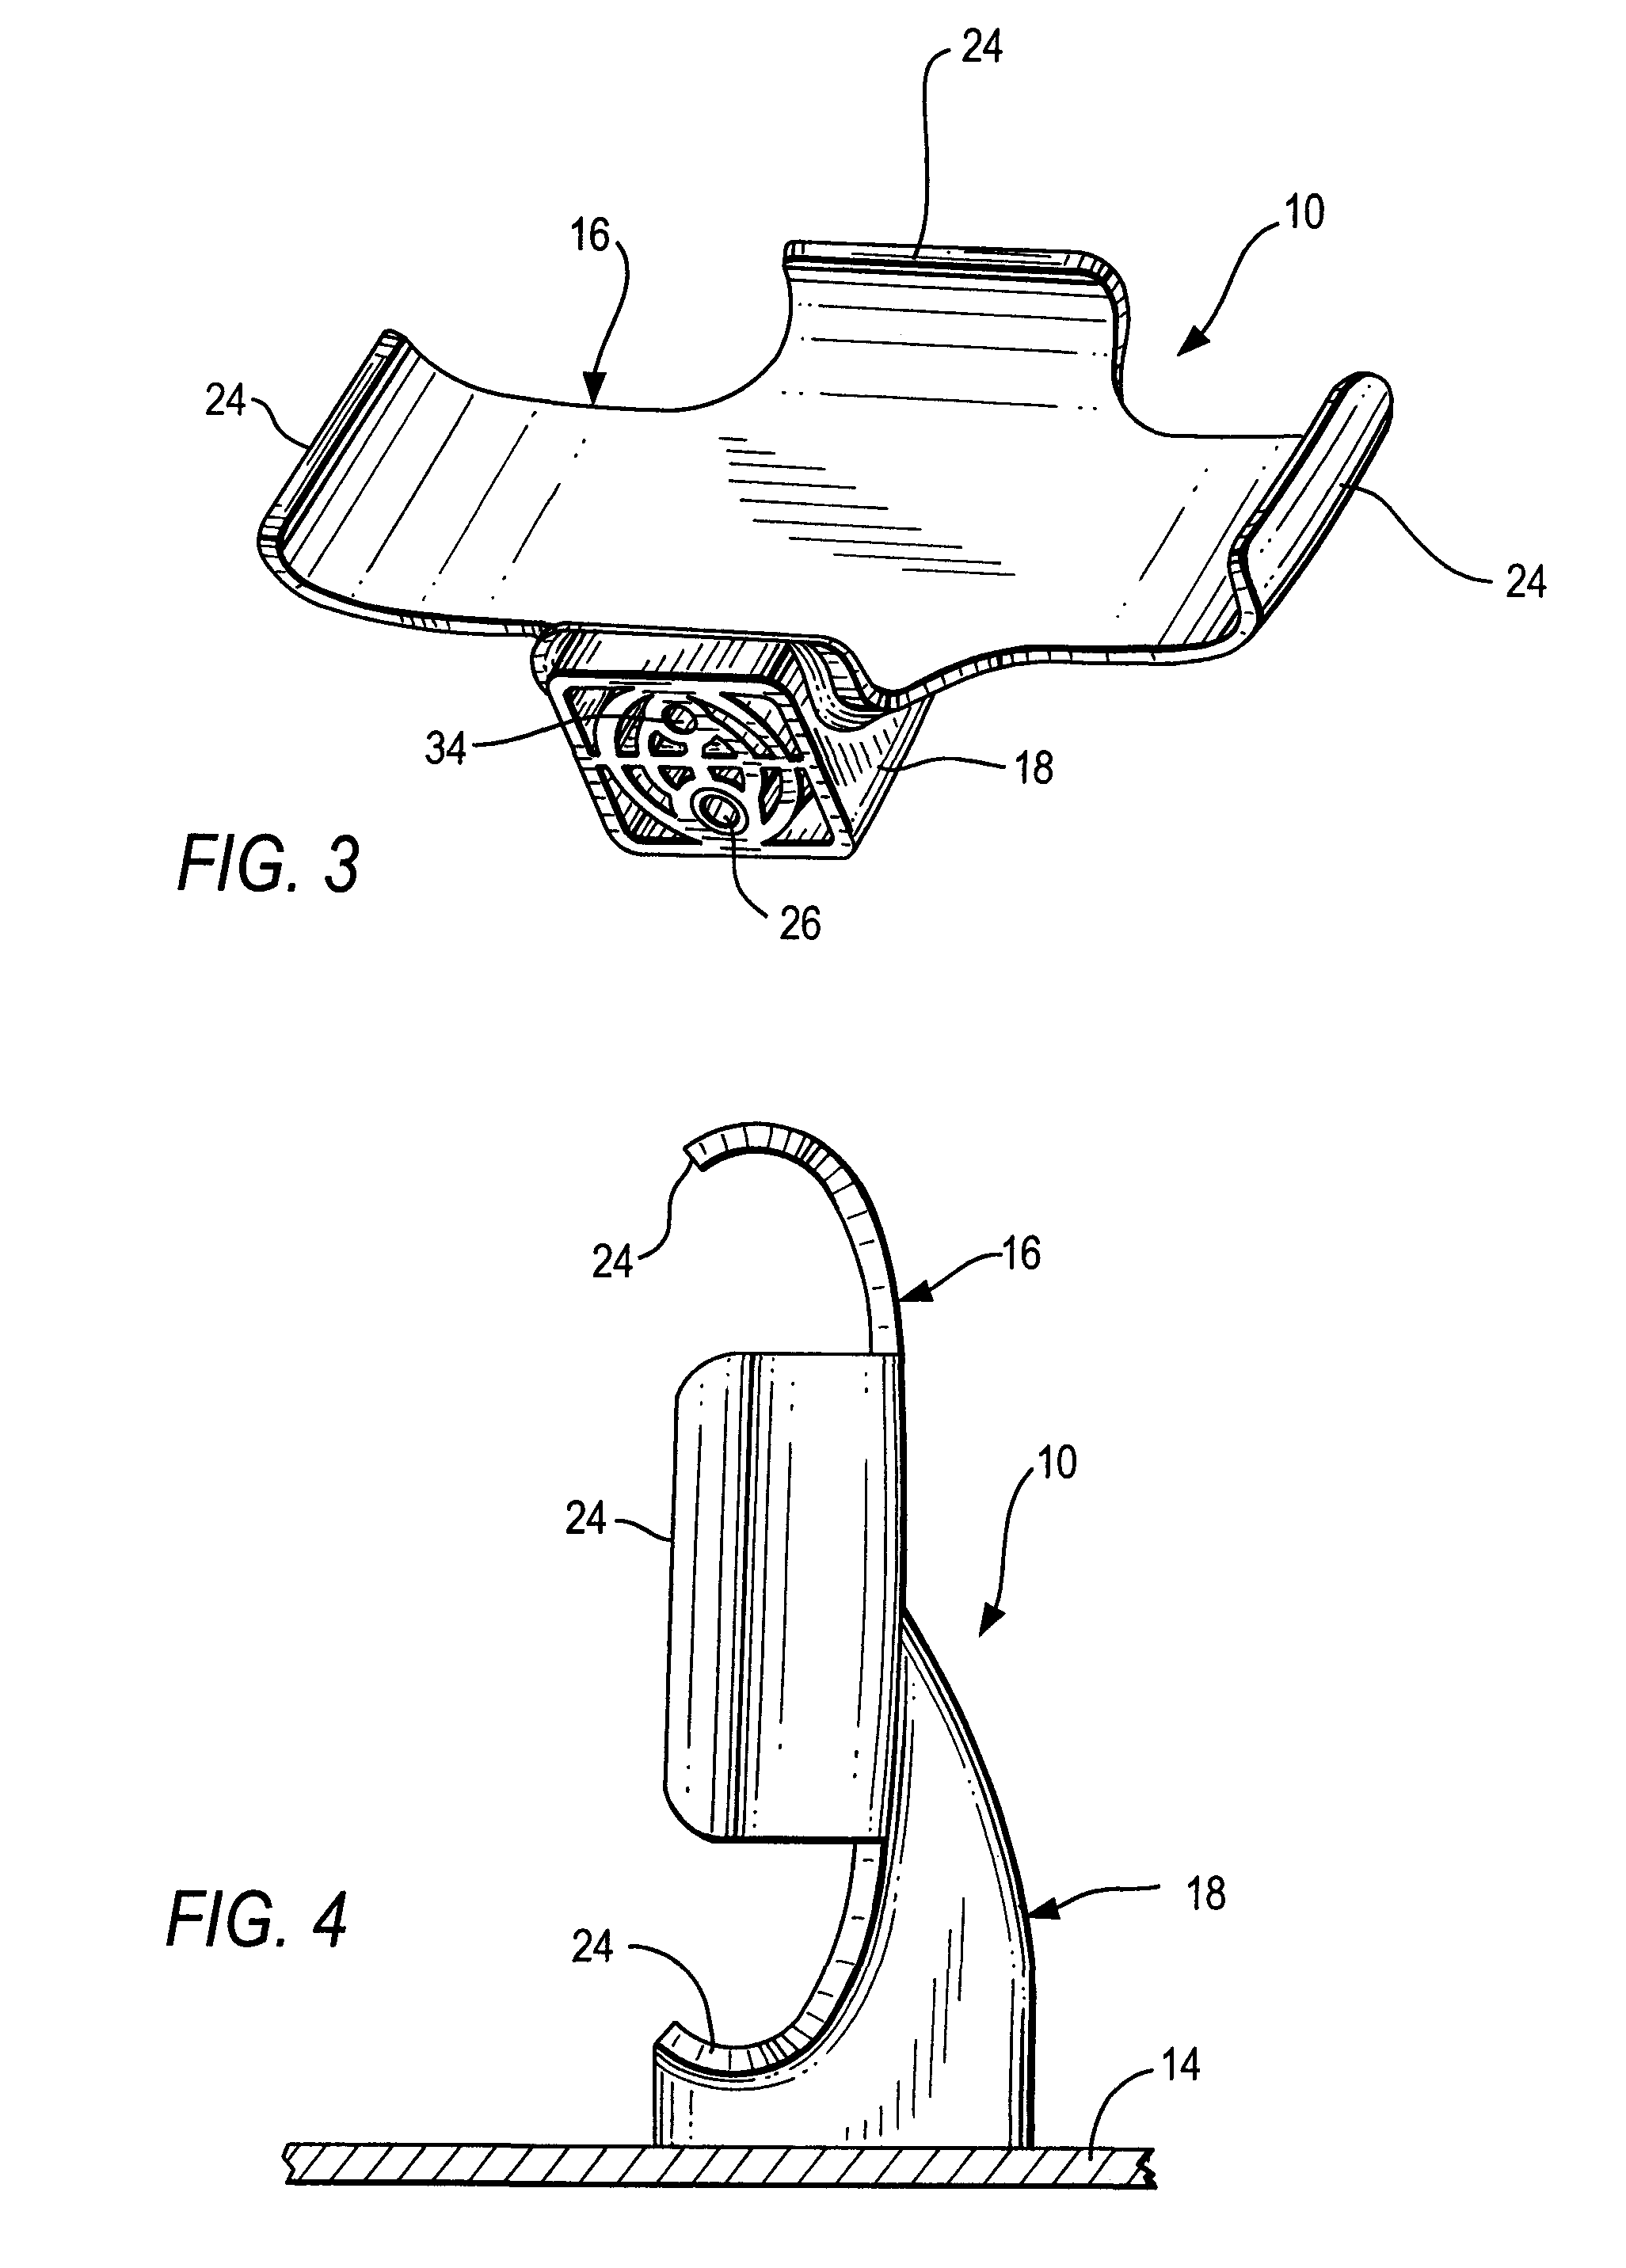 Stabilized mount for, and method of, steadily supporting a motion-sensitive, image capture device